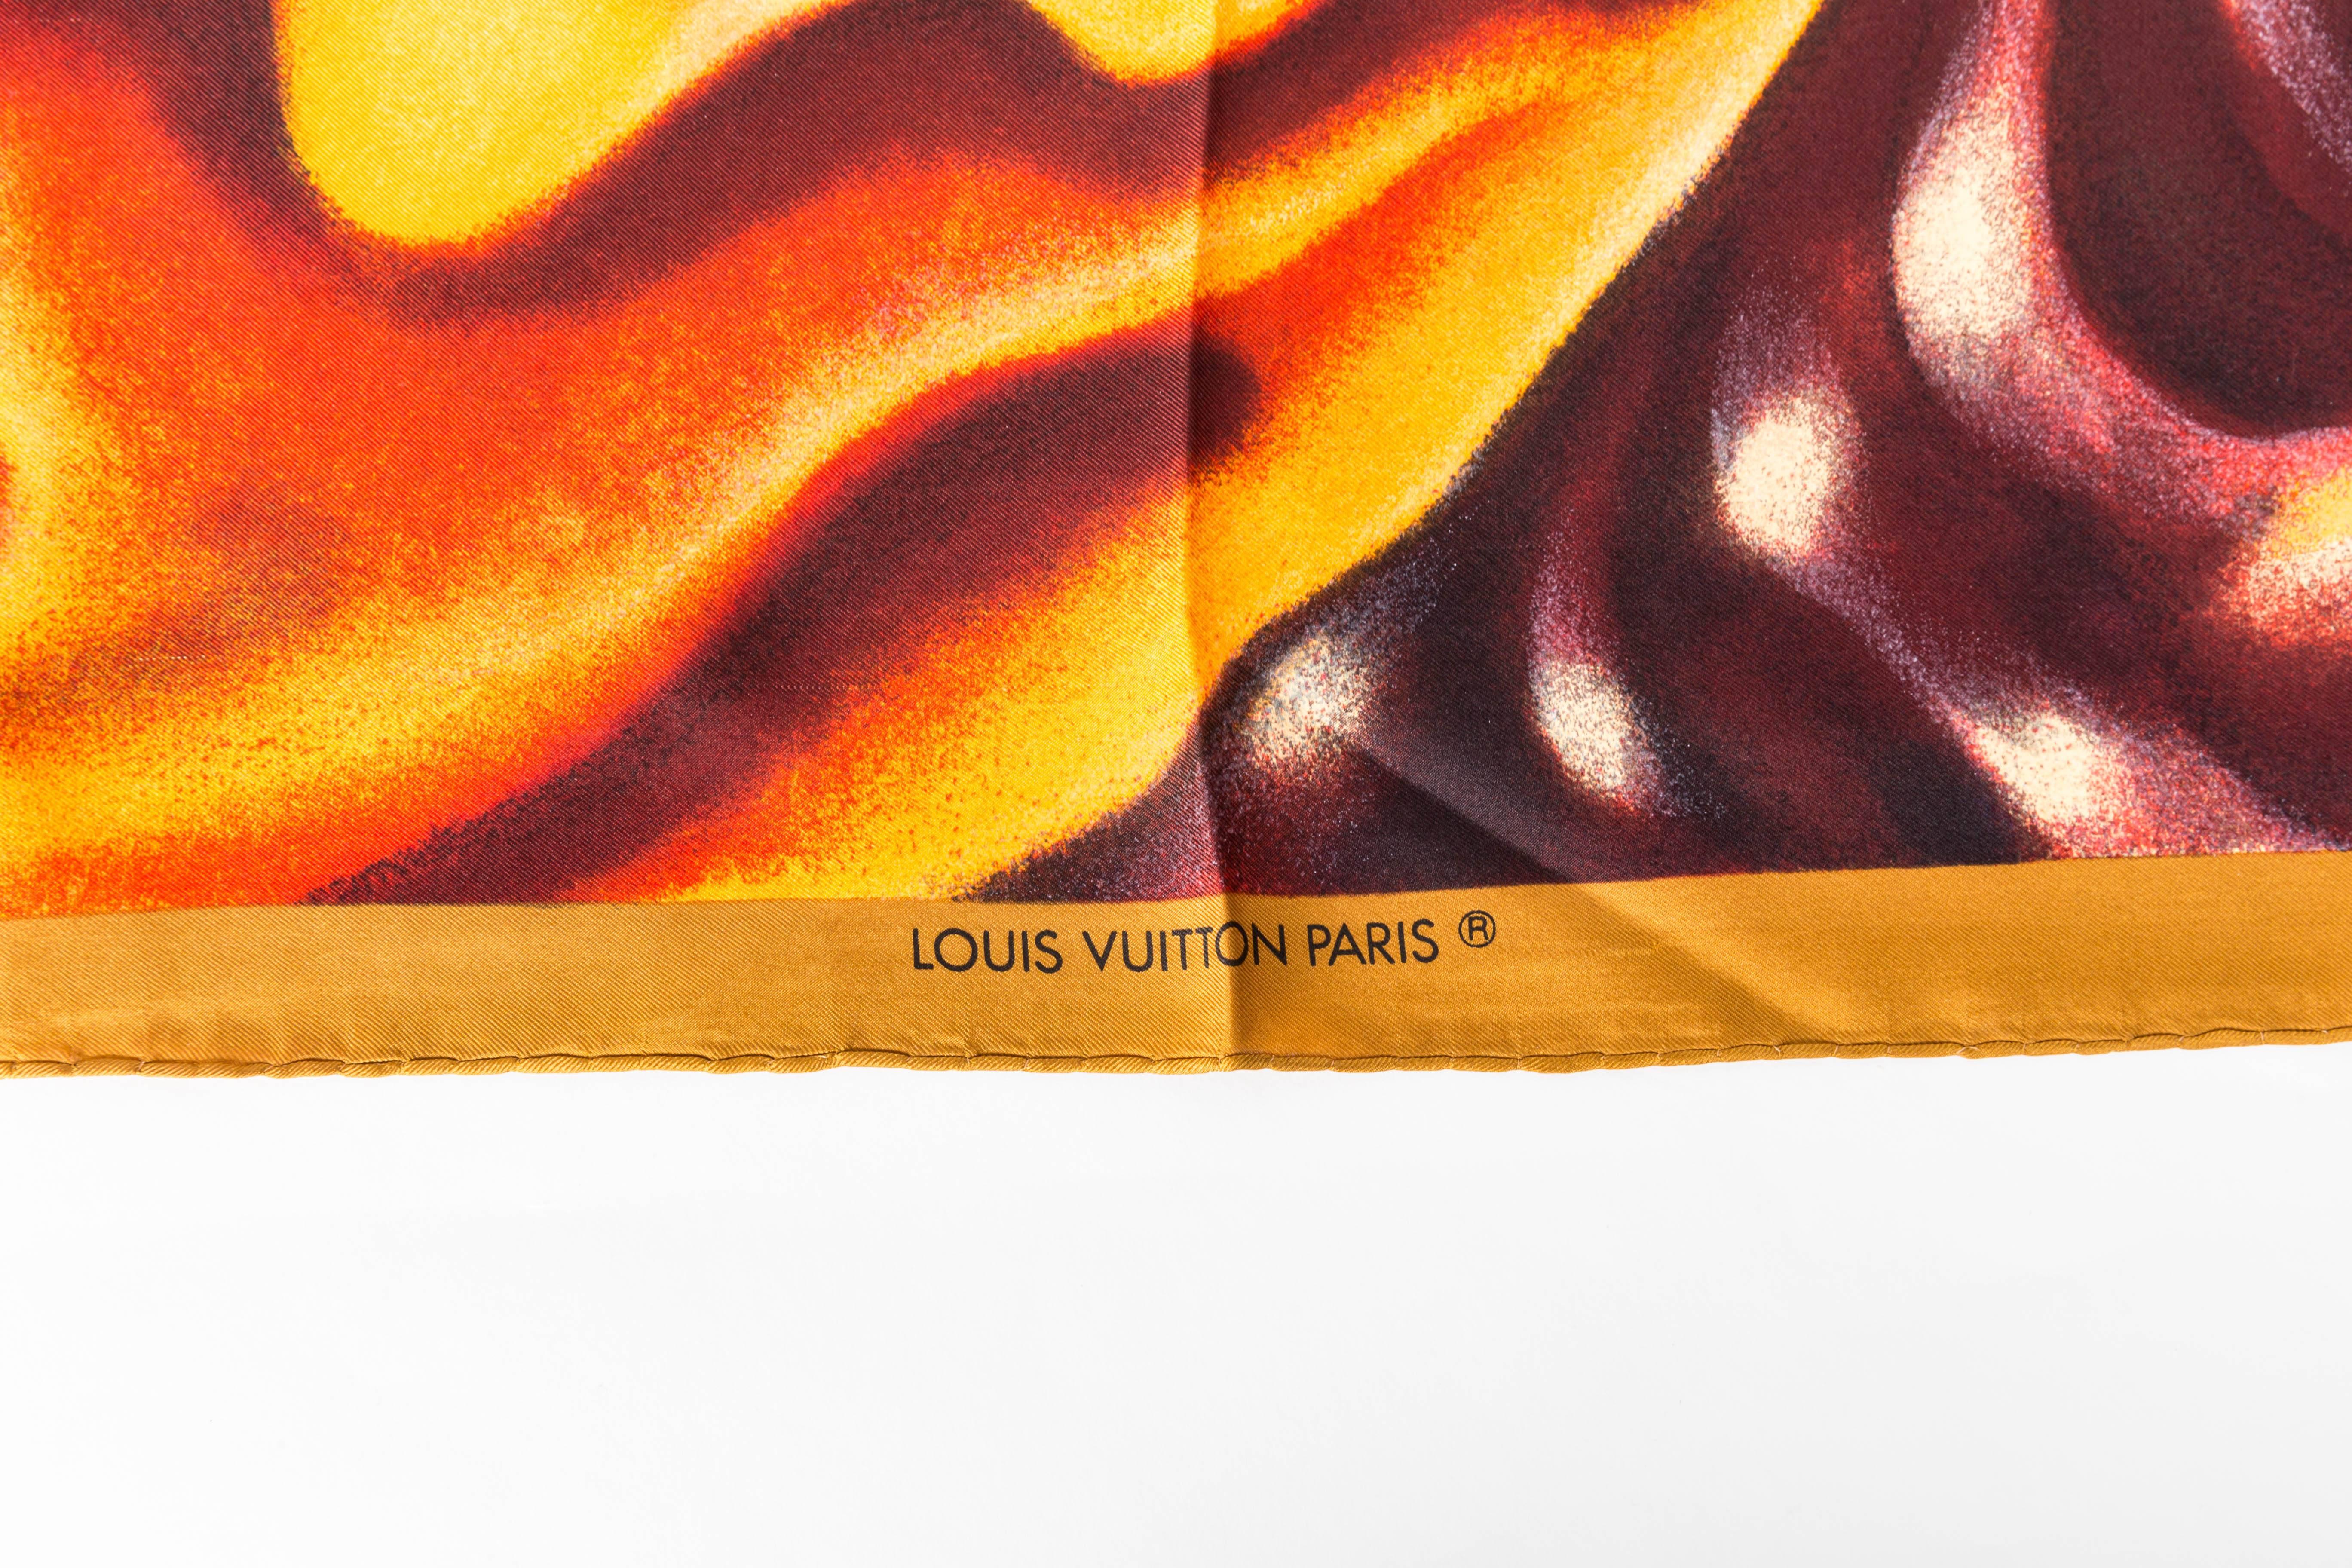 Amazing S Chia Silk Print Scarf for Louis Vuitton
Excellent Condition
33 x 34 inches
